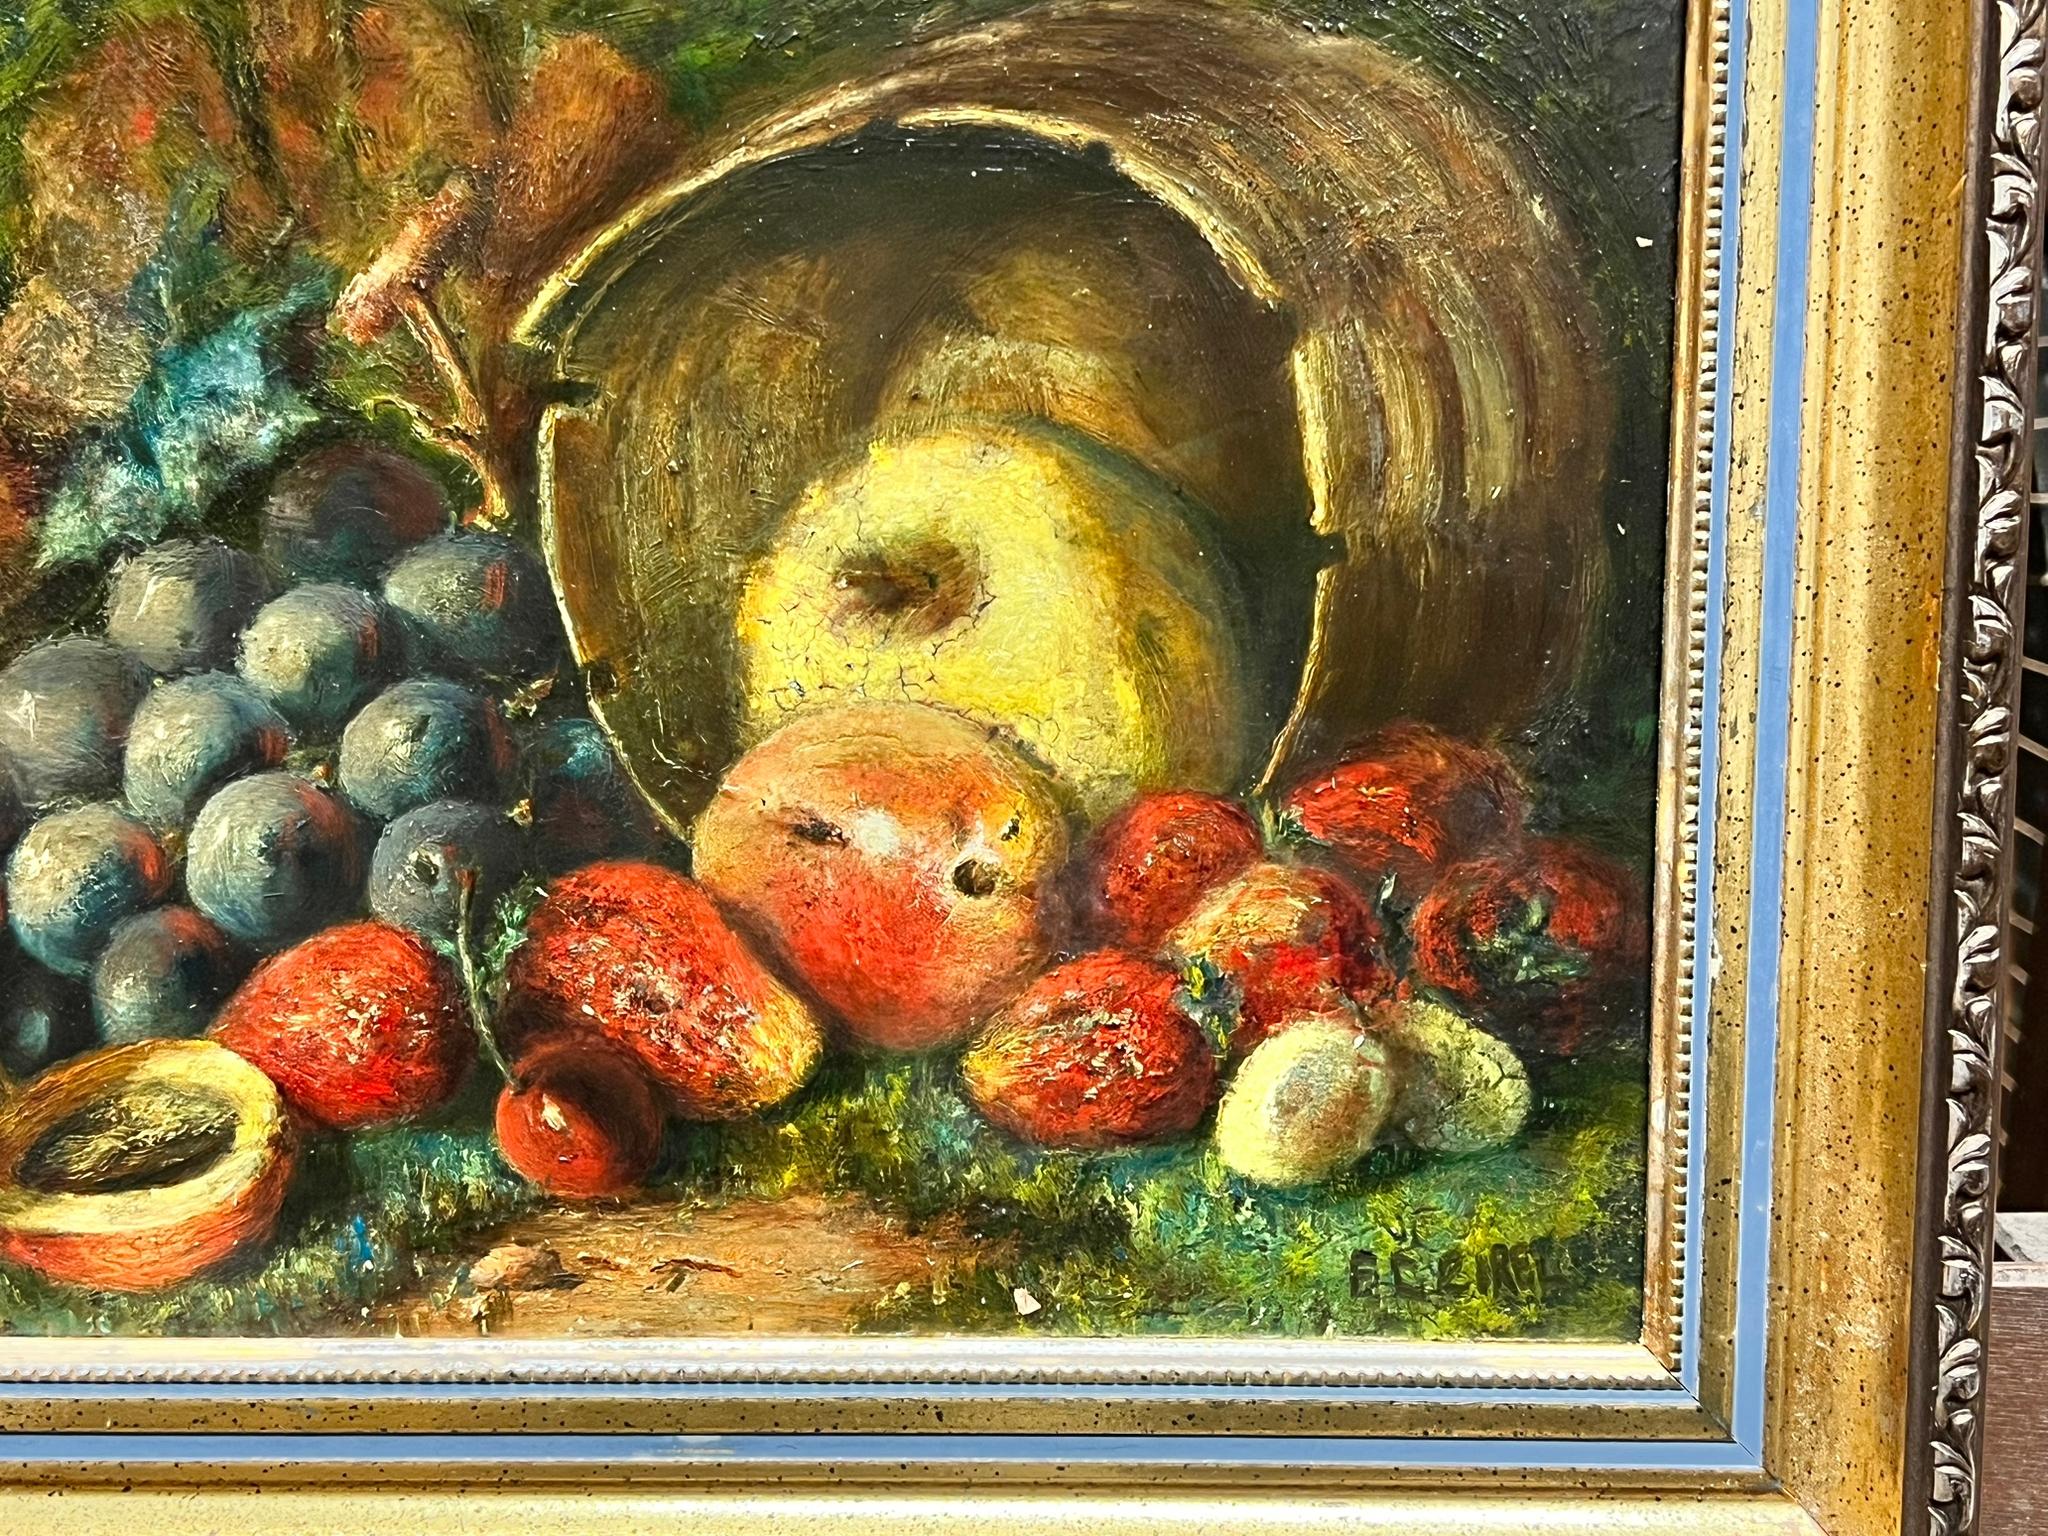 Fruit Still Life
Attributed to Ferdinand Cirel (Welsh 1884 - 1968)
signed bottom right
oil on board, framed
framed: 14 x 15 inches
painting: 10 x 12 inches
provenance: from a collection in the South West of England
The painting is in good and